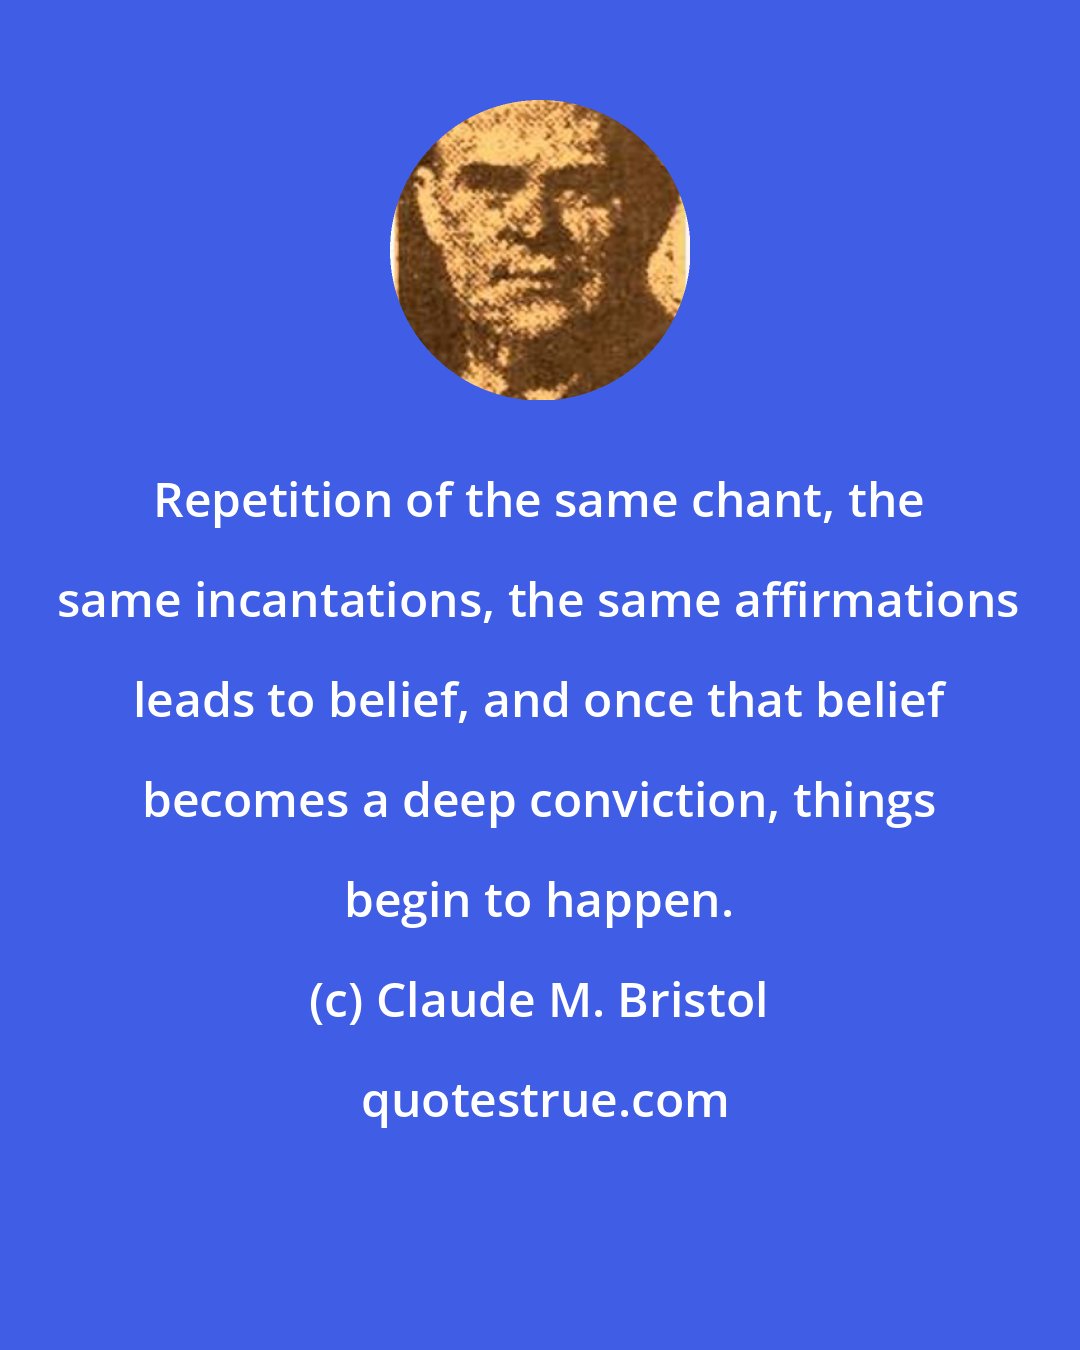 Claude M. Bristol: Repetition of the same chant, the same incantations, the same affirmations leads to belief, and once that belief becomes a deep conviction, things begin to happen.